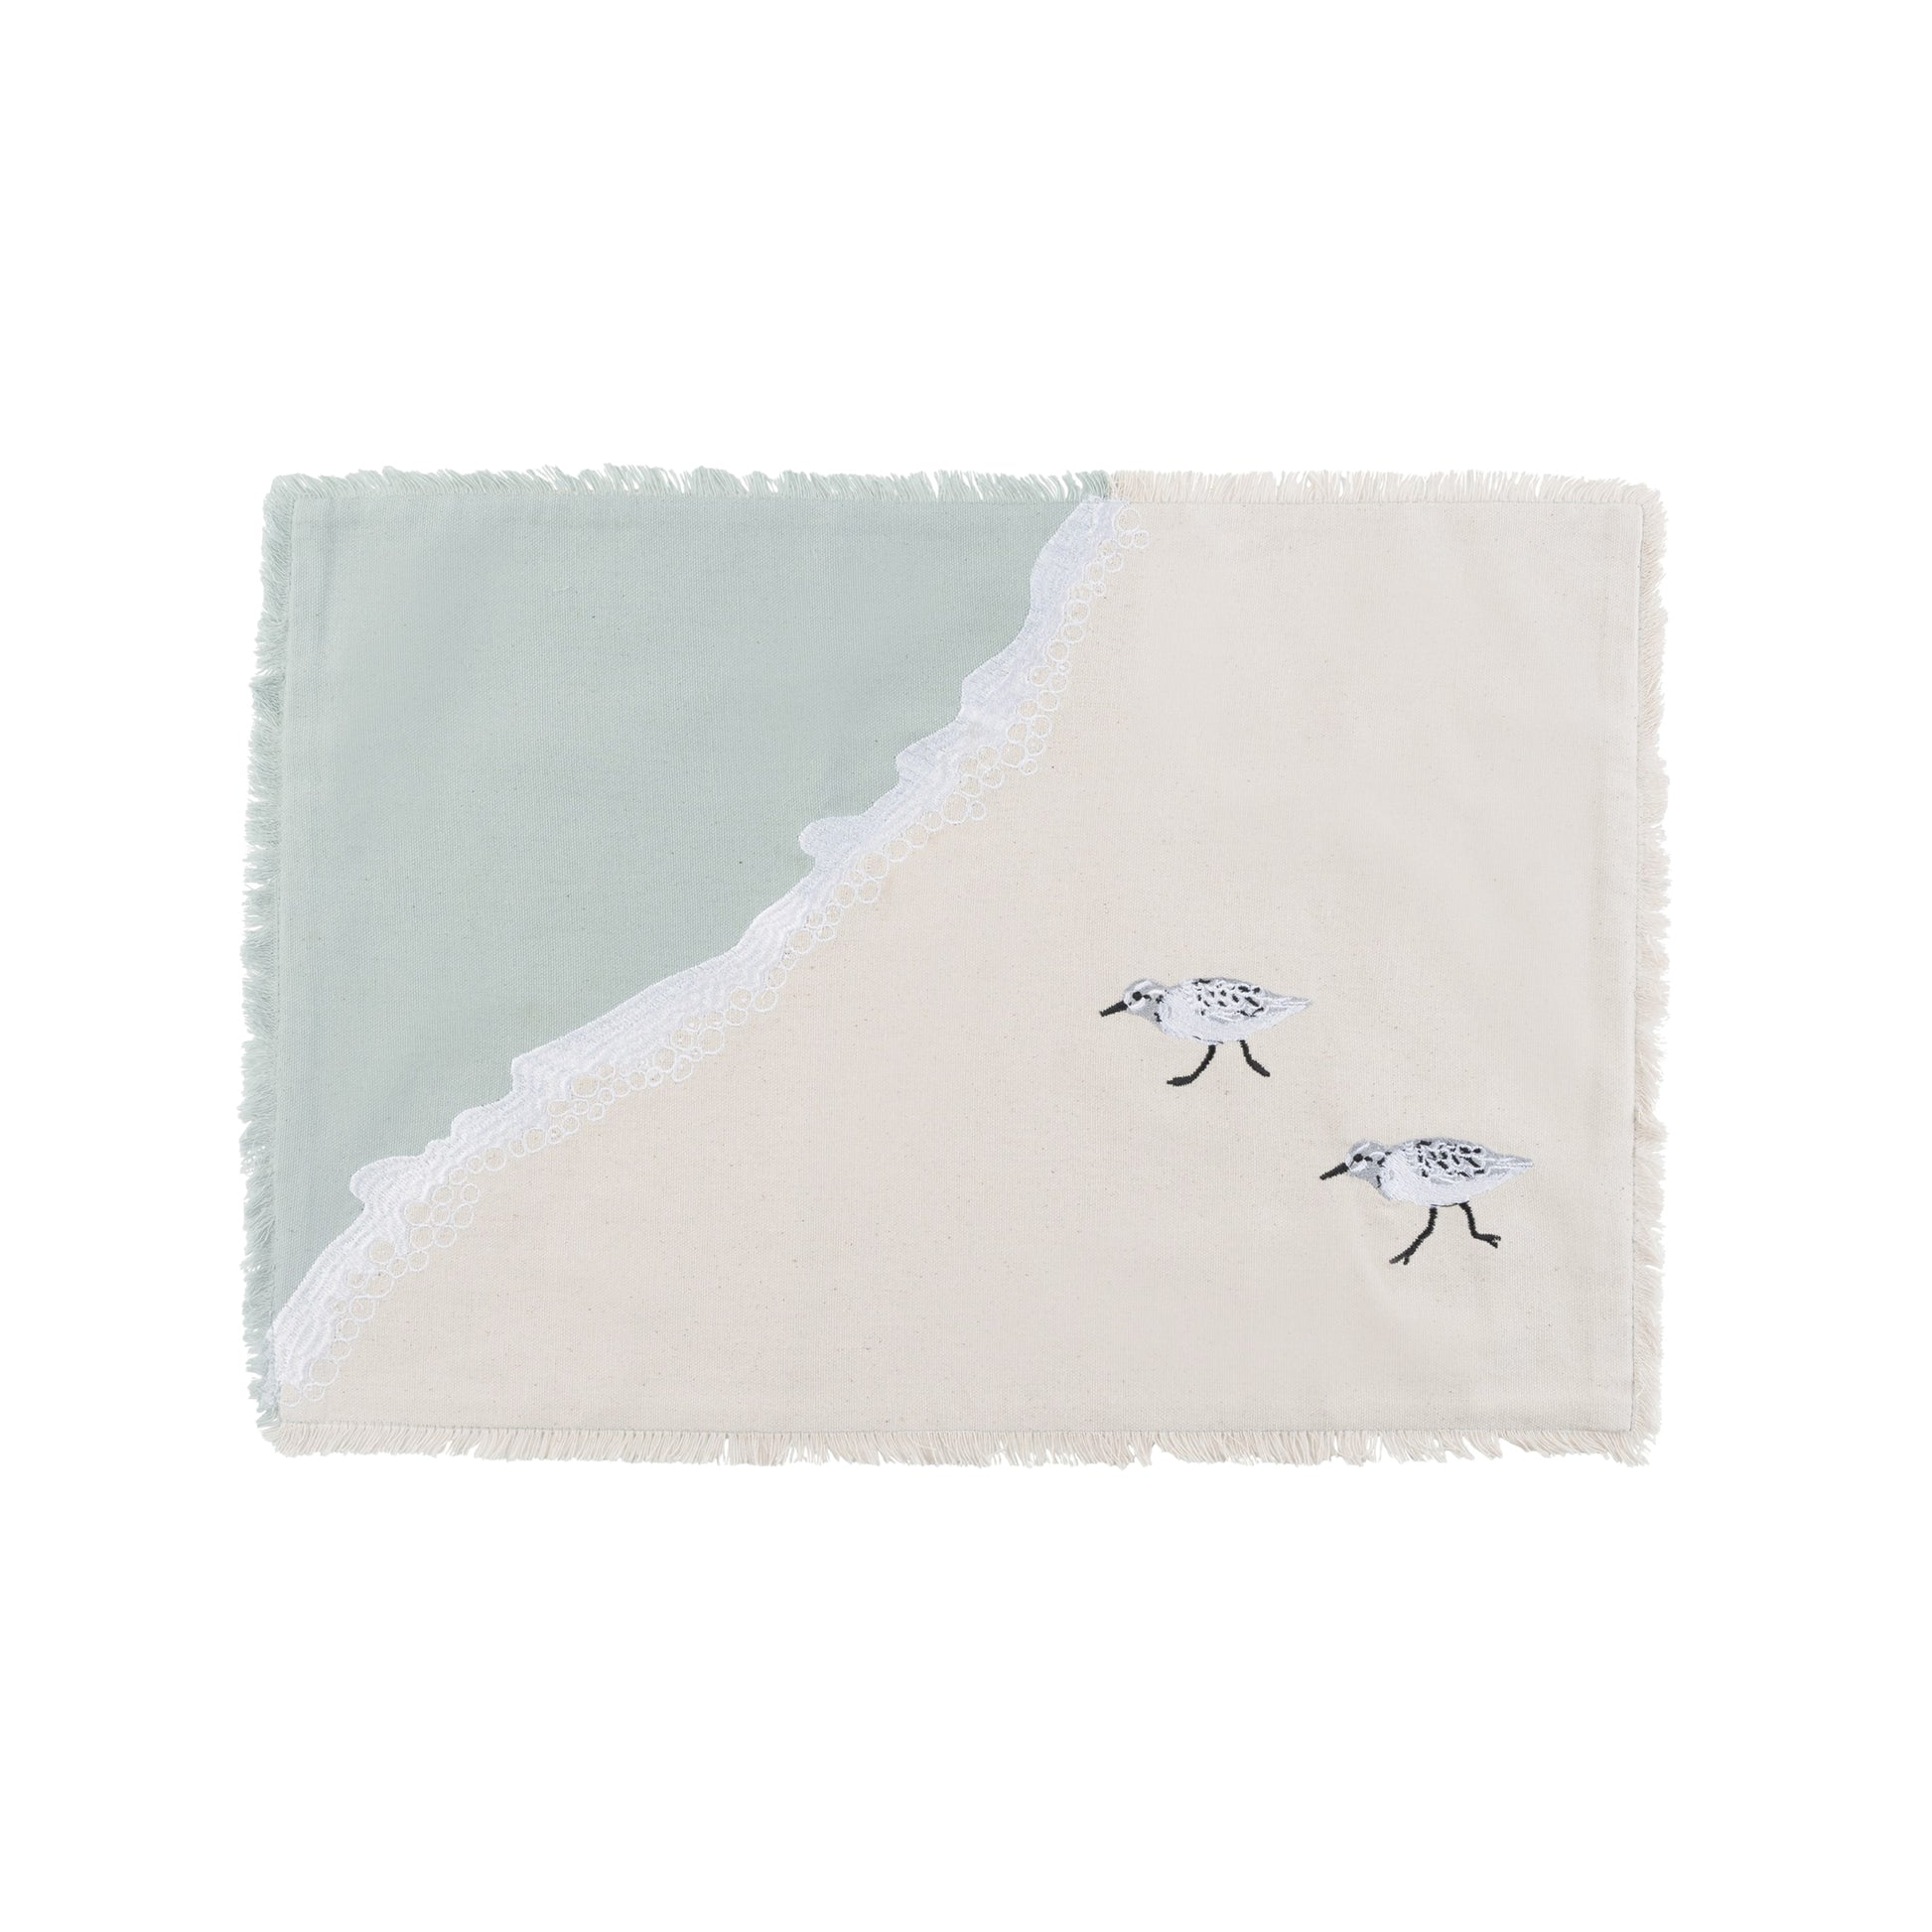 Sandpipers embroidered on a cotton fringed placemat featuring blue waves on sand. 